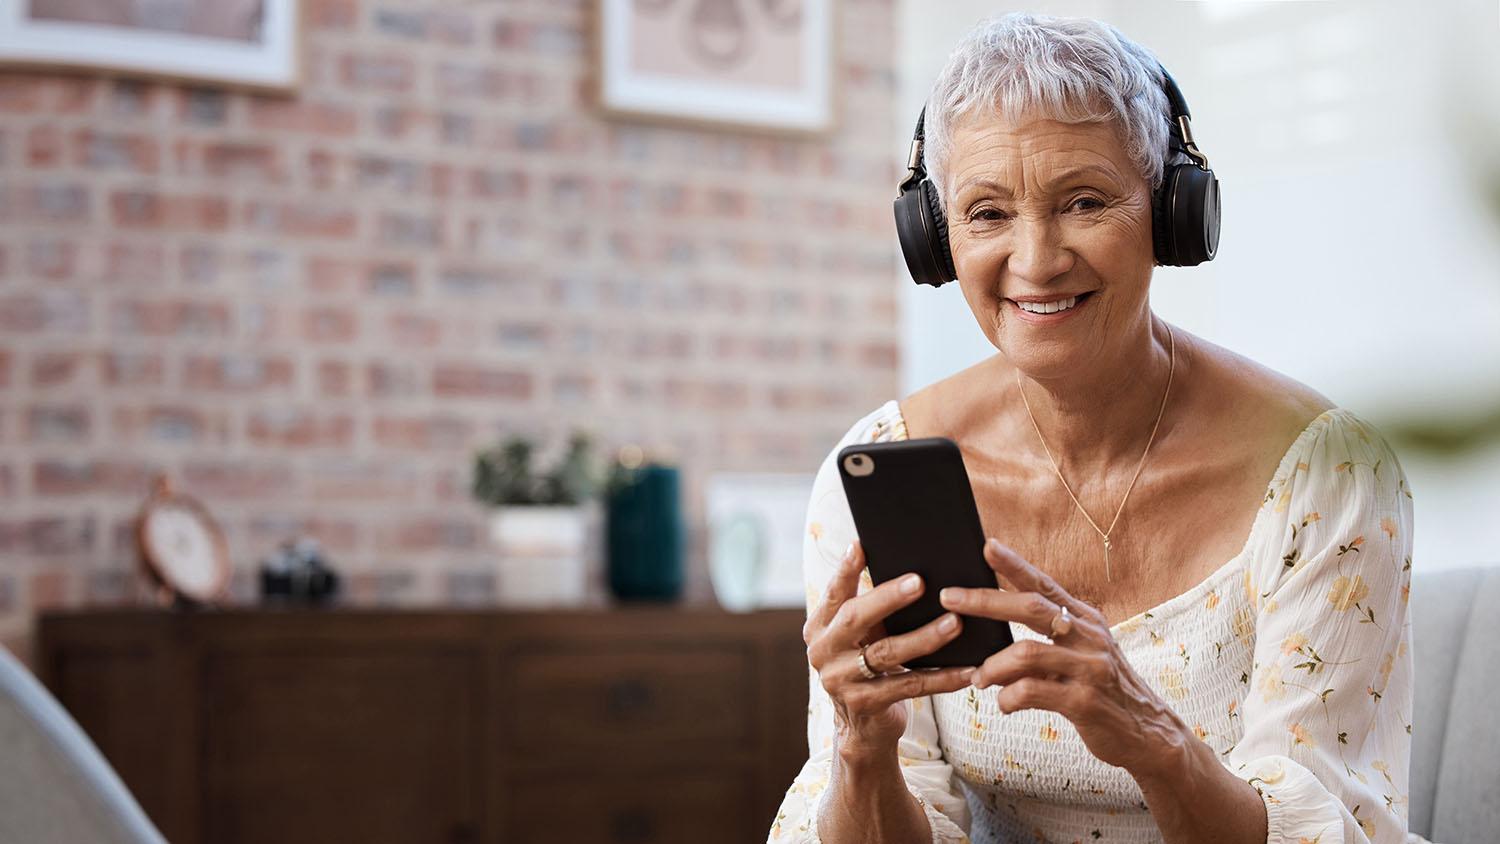 Woman listening to a podcast on her phone